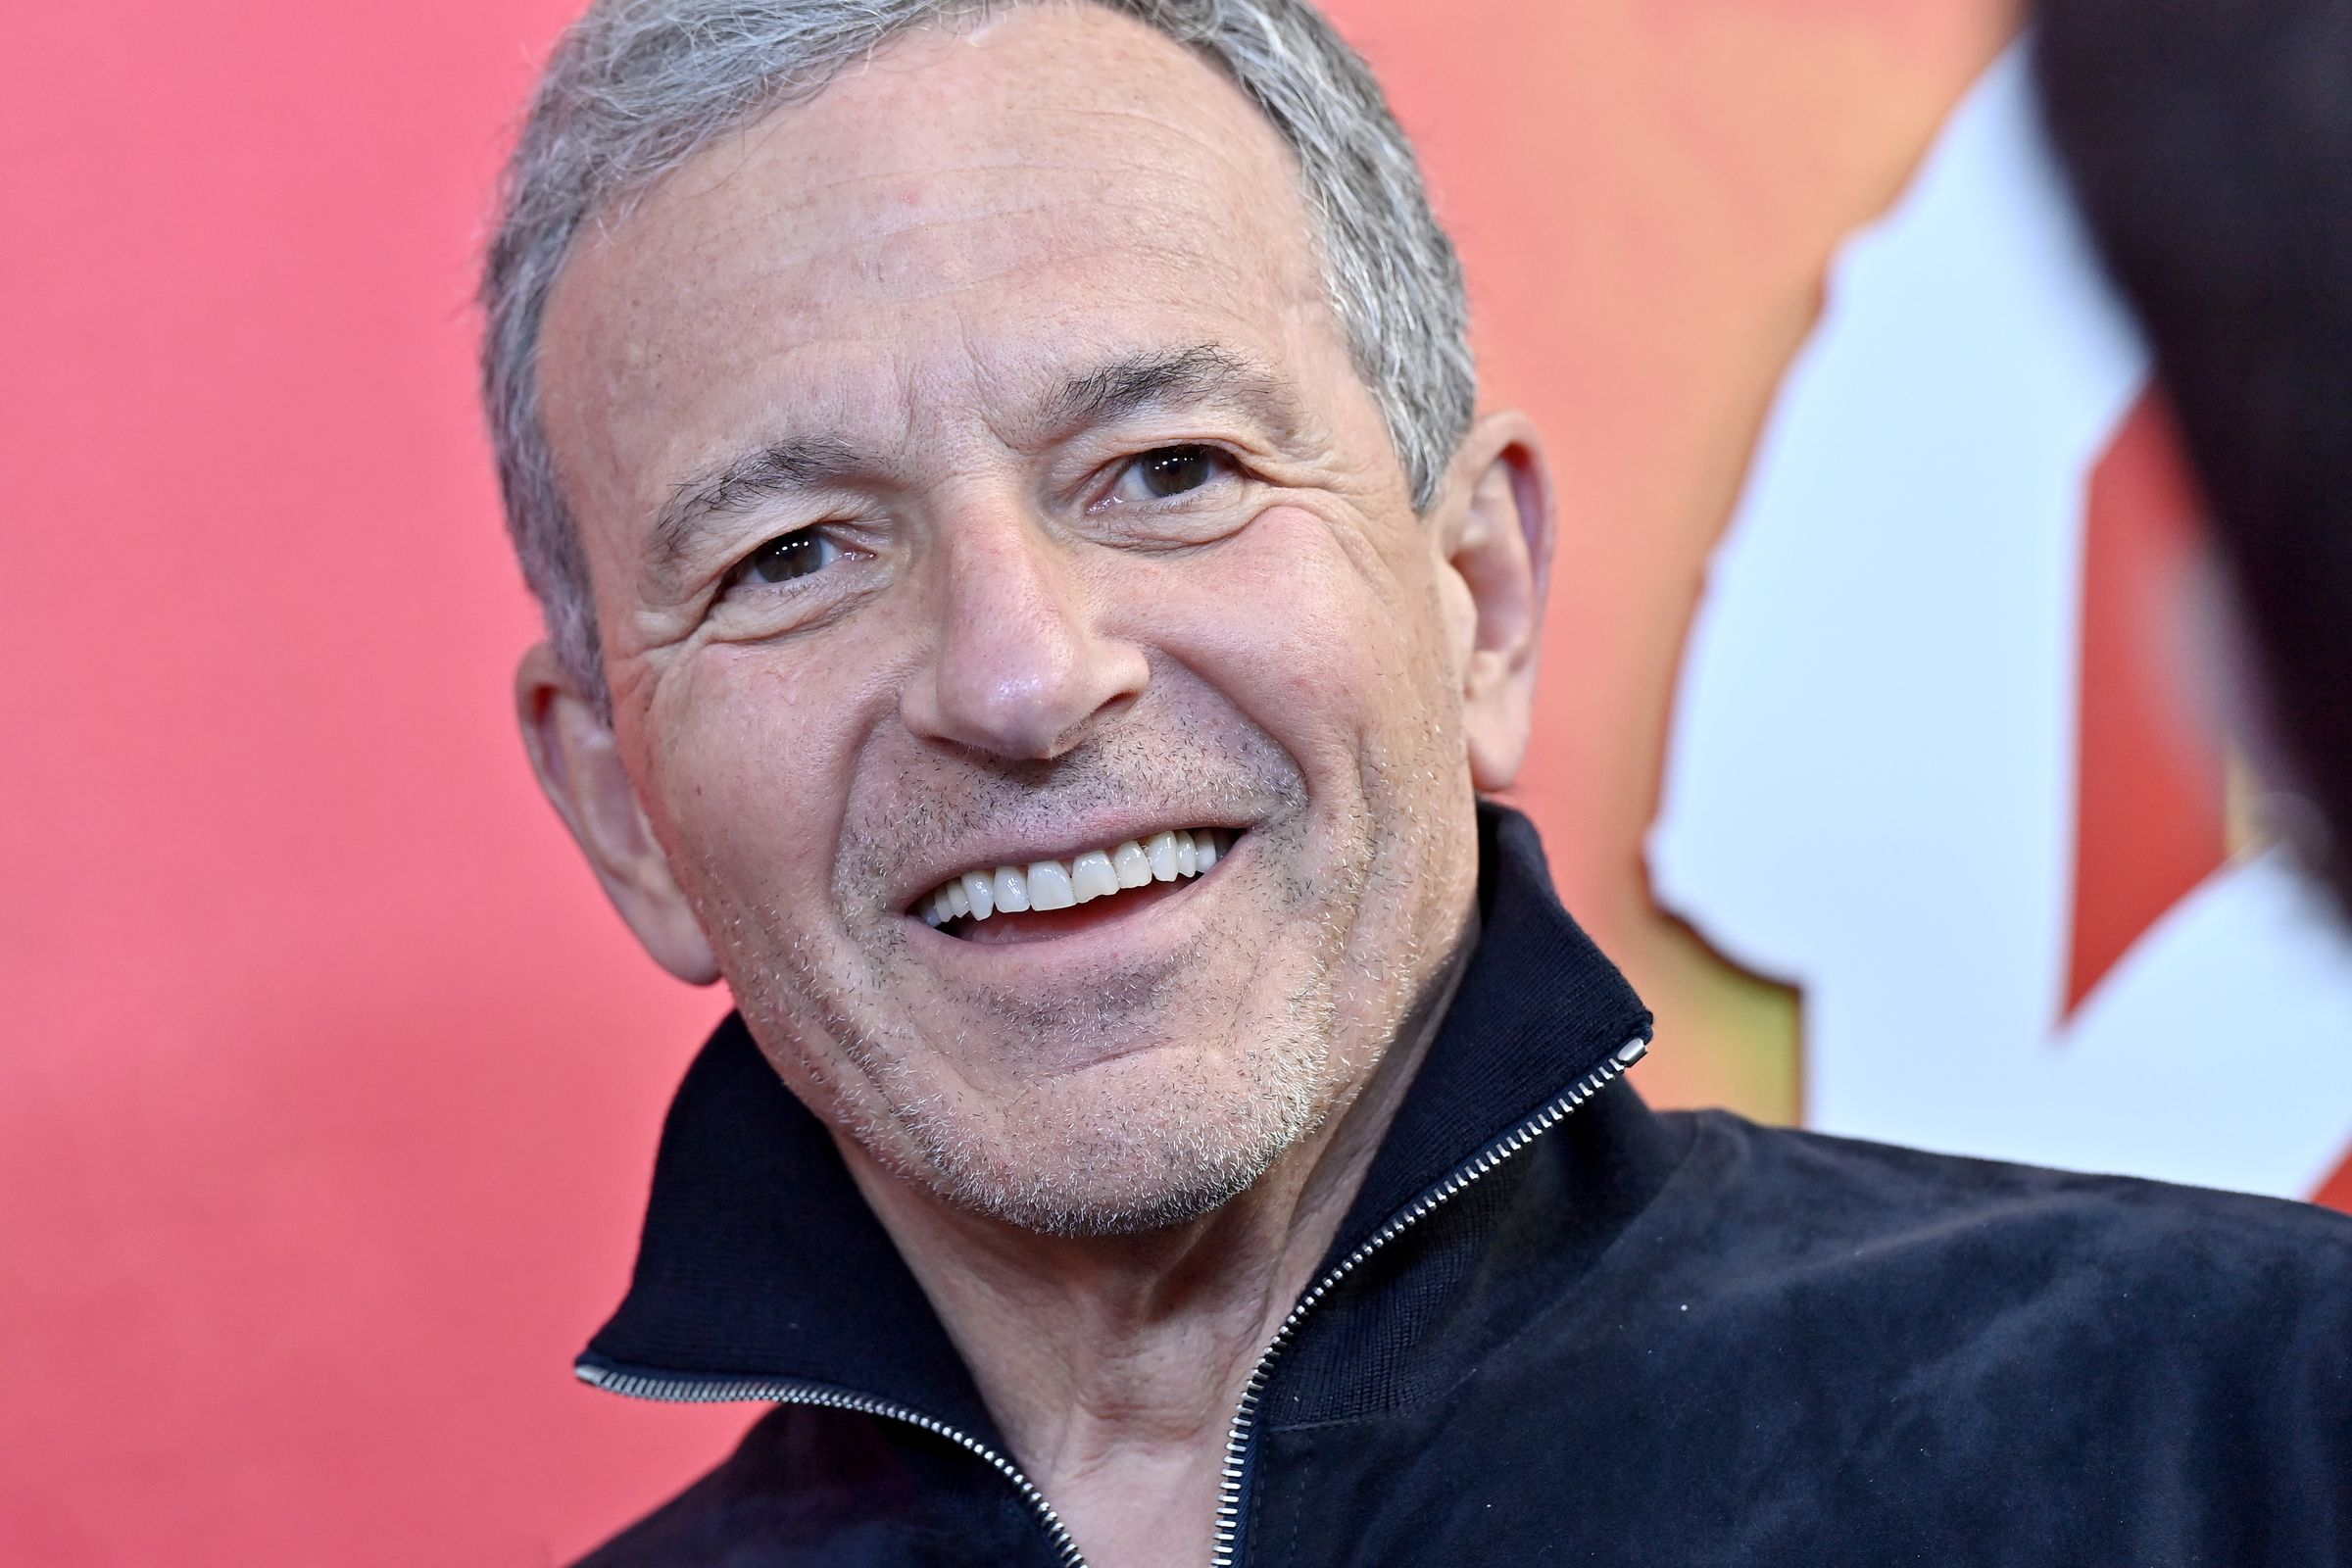 Disney CEO Bob Iger, an older white man with graying hair and wearing in a black sweater zip up, smiles at the camera.